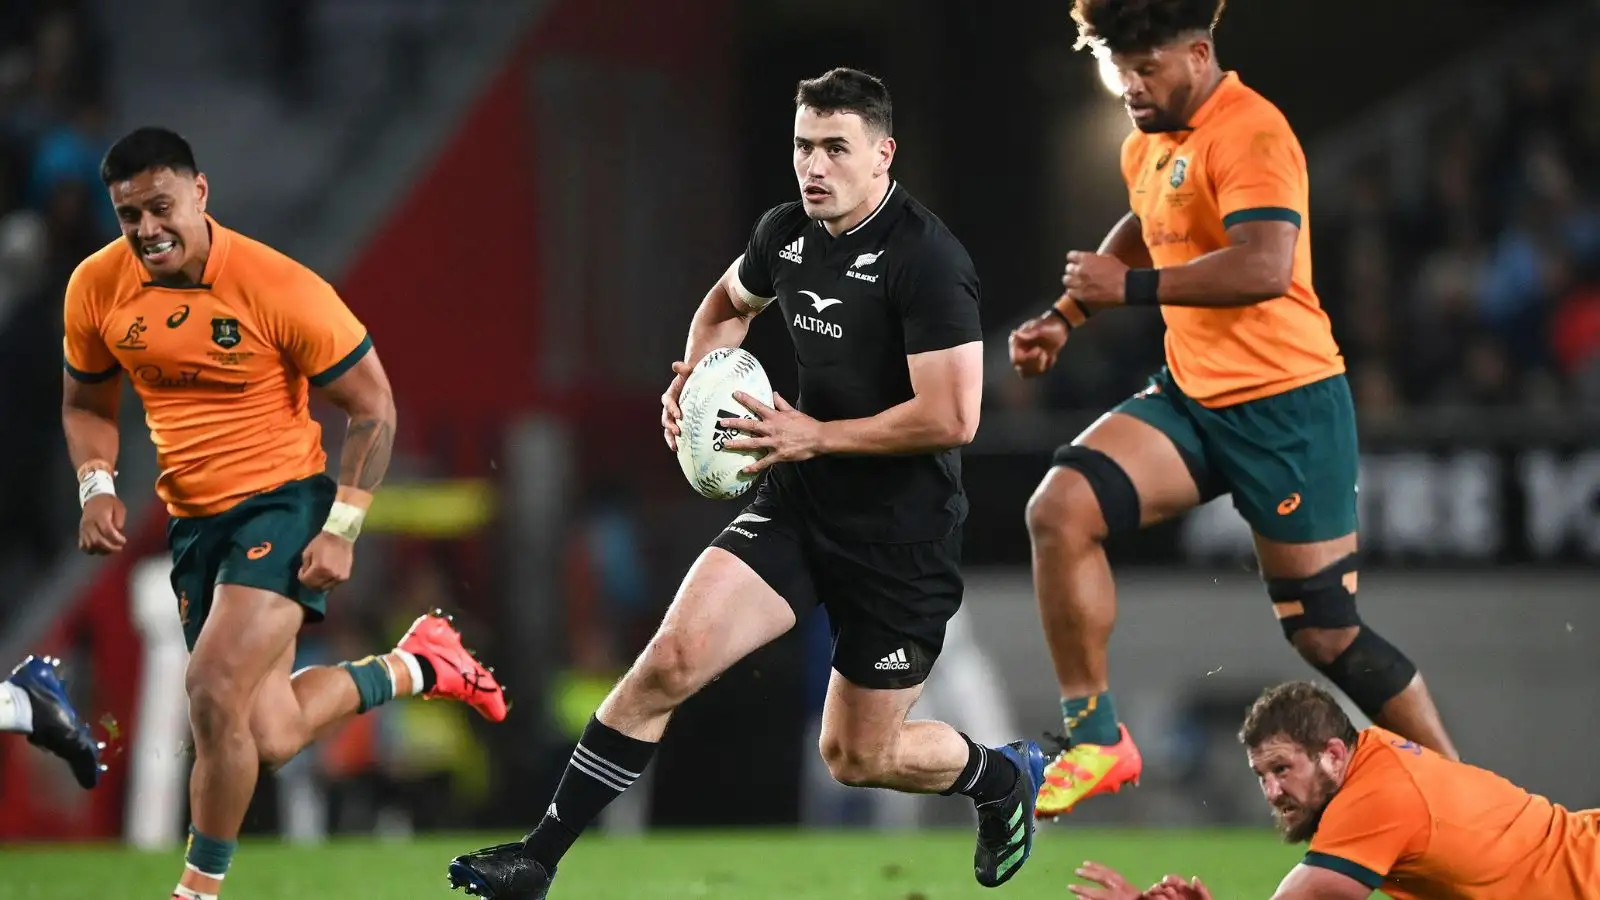 All Blacks and Crusaders star Will Jordan has signed a new long-term deal to remain in New Zealand through to the next Rugby World Cup.